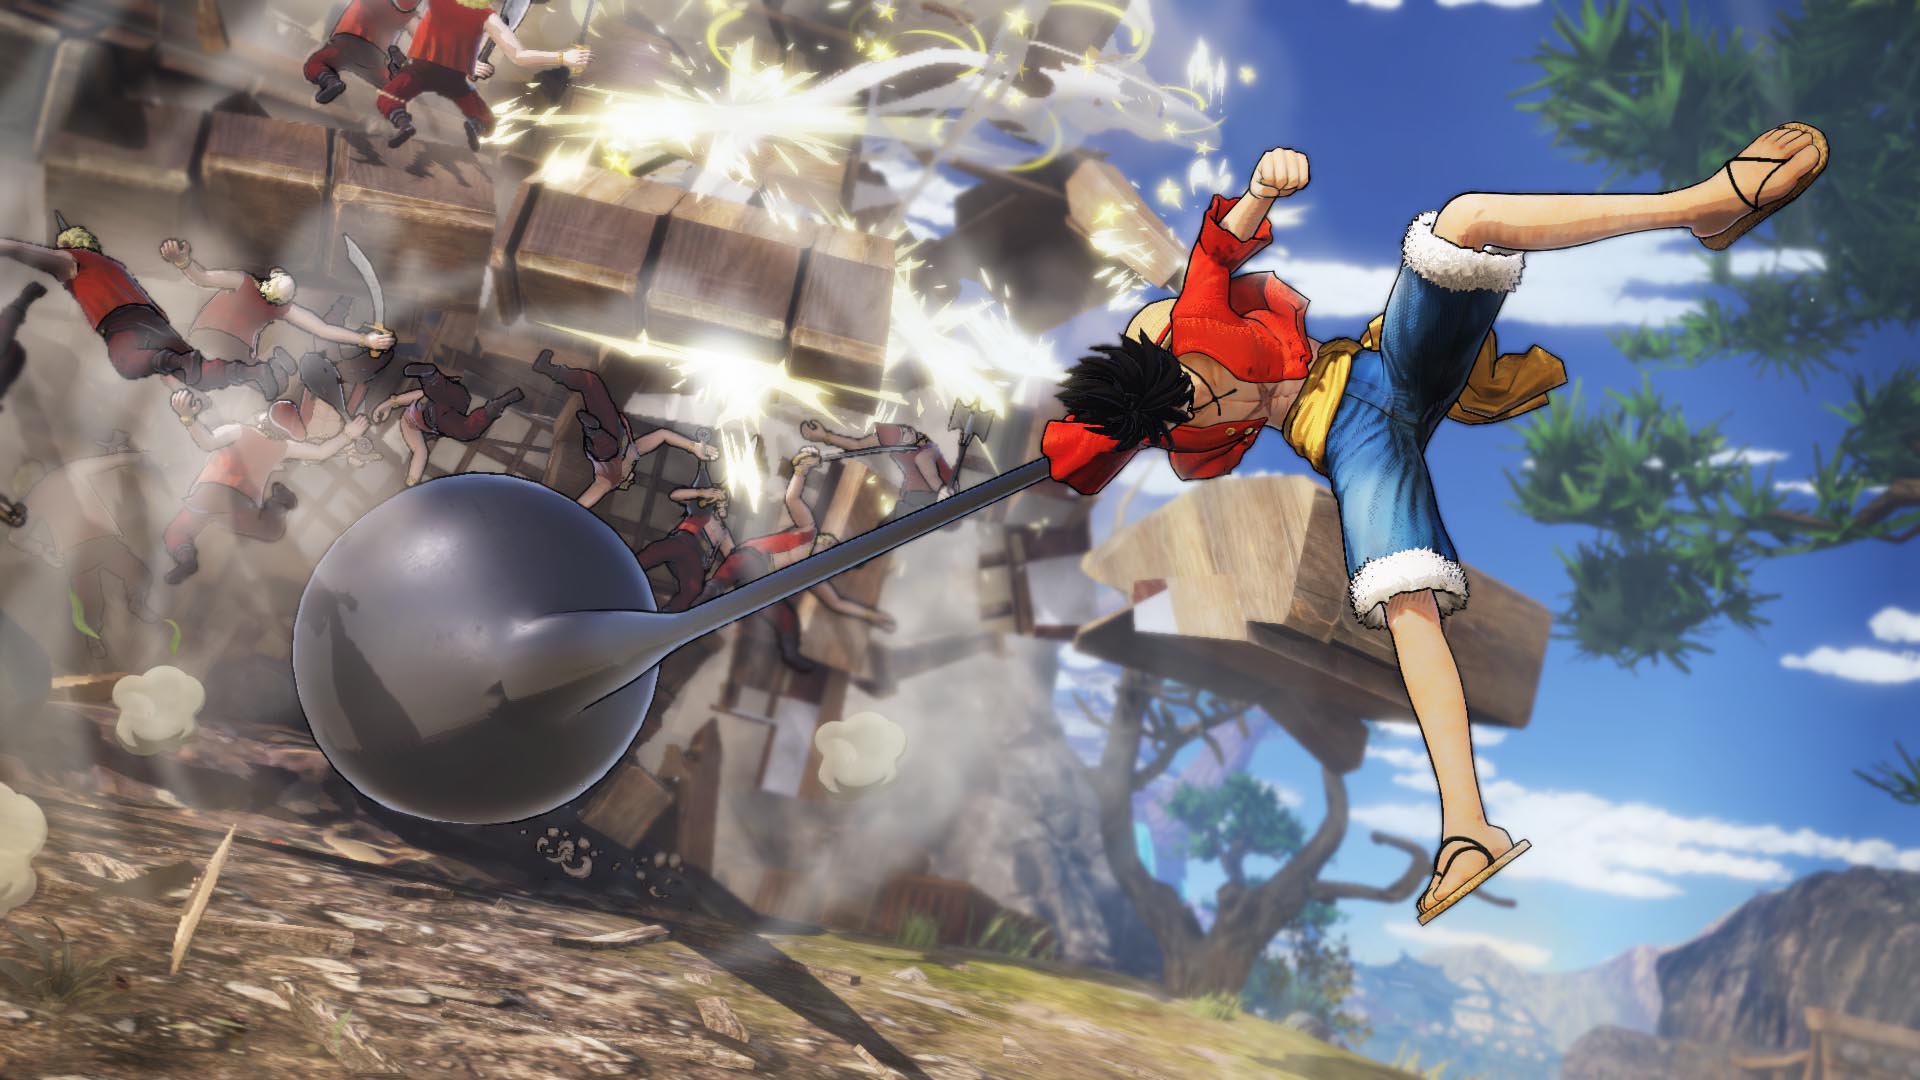 ONE PIECE PIRATE WARRIORS 4 Deluxe Edition 7